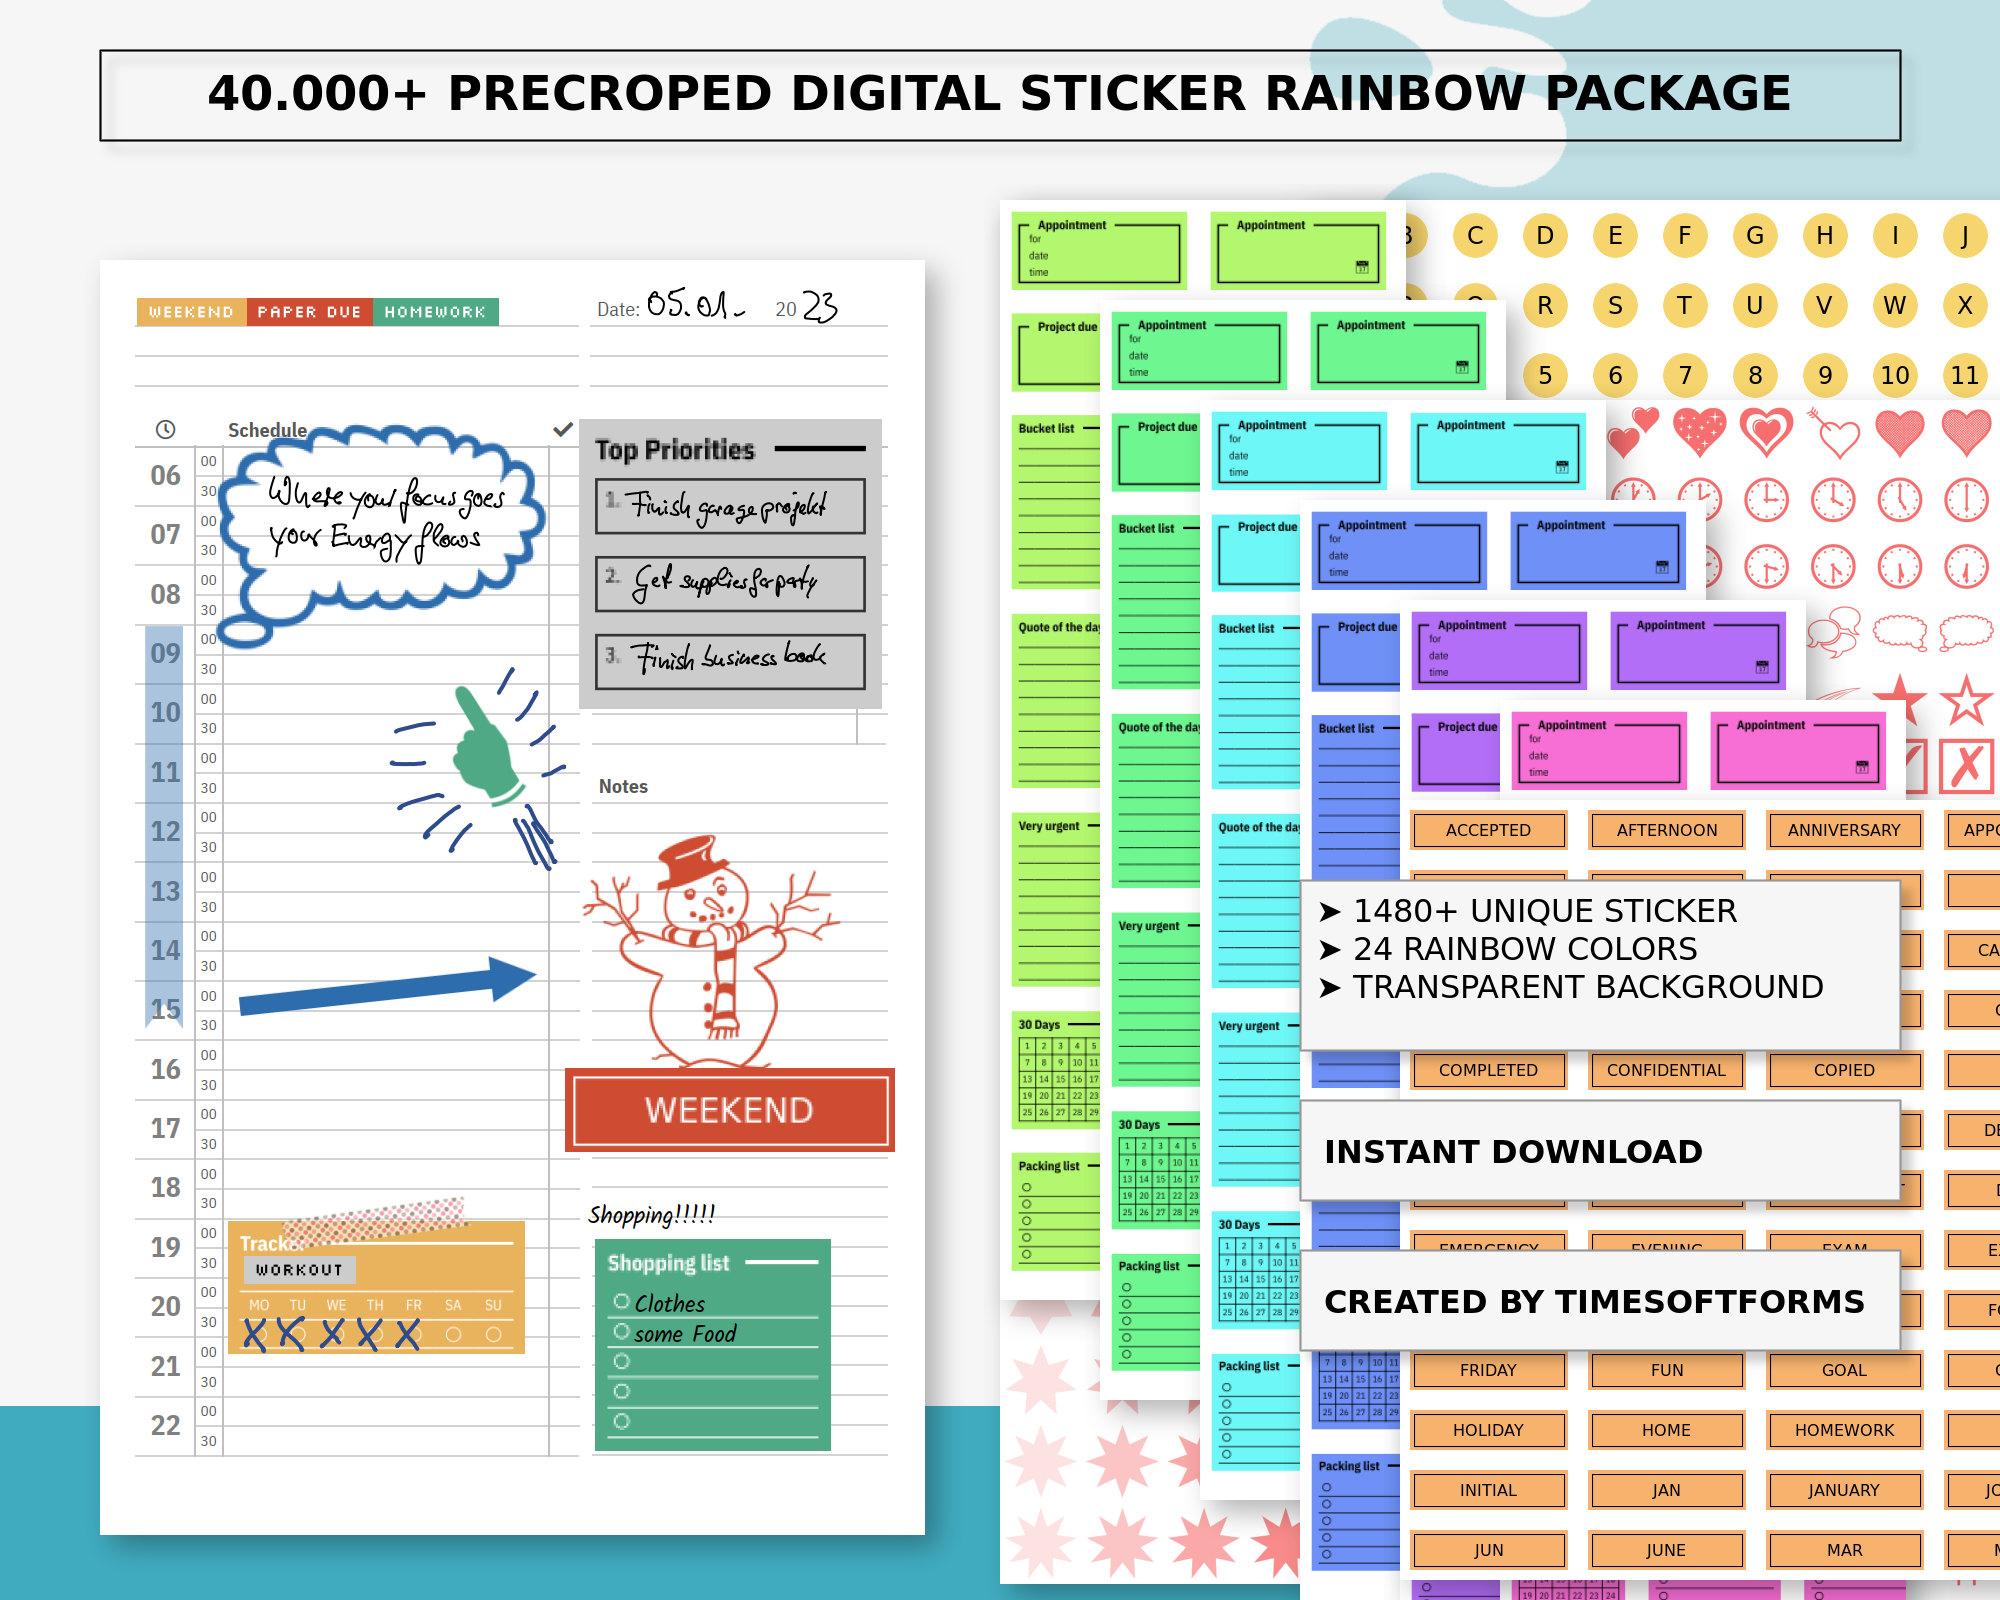 Protected: Sticker Rainbow Colors 150dpi